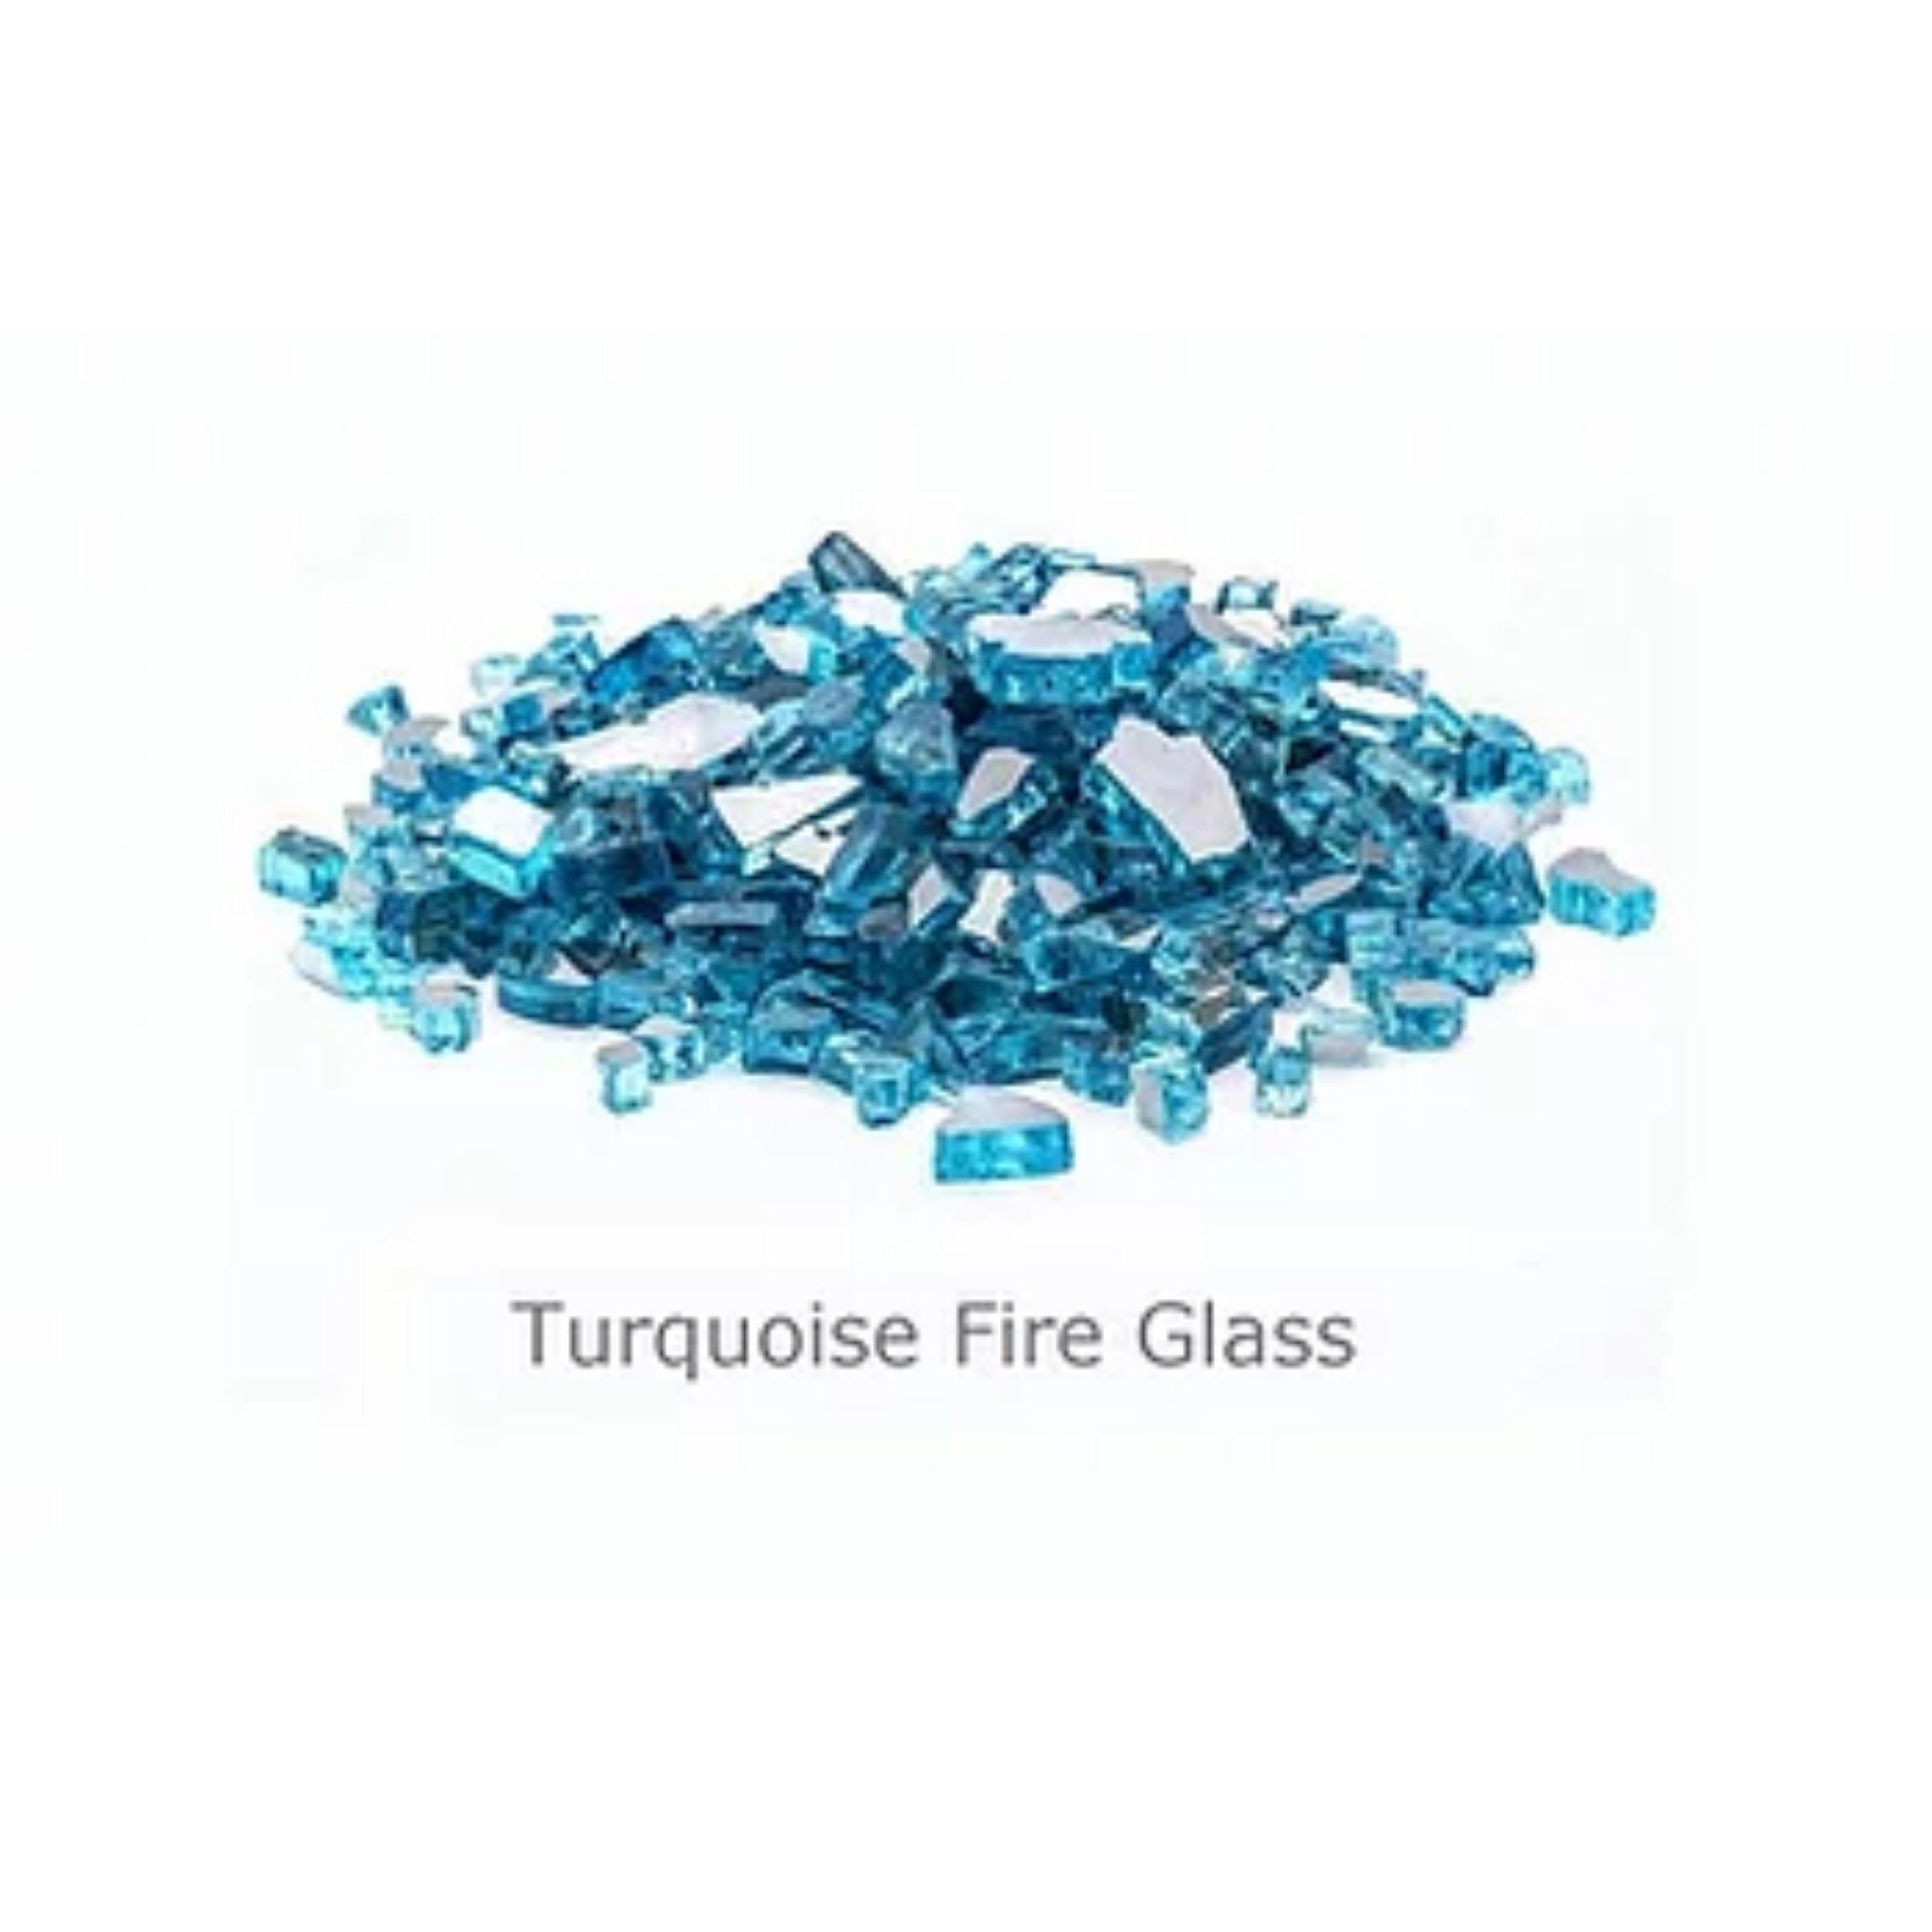 Pottery Works turquoise fireglass sample